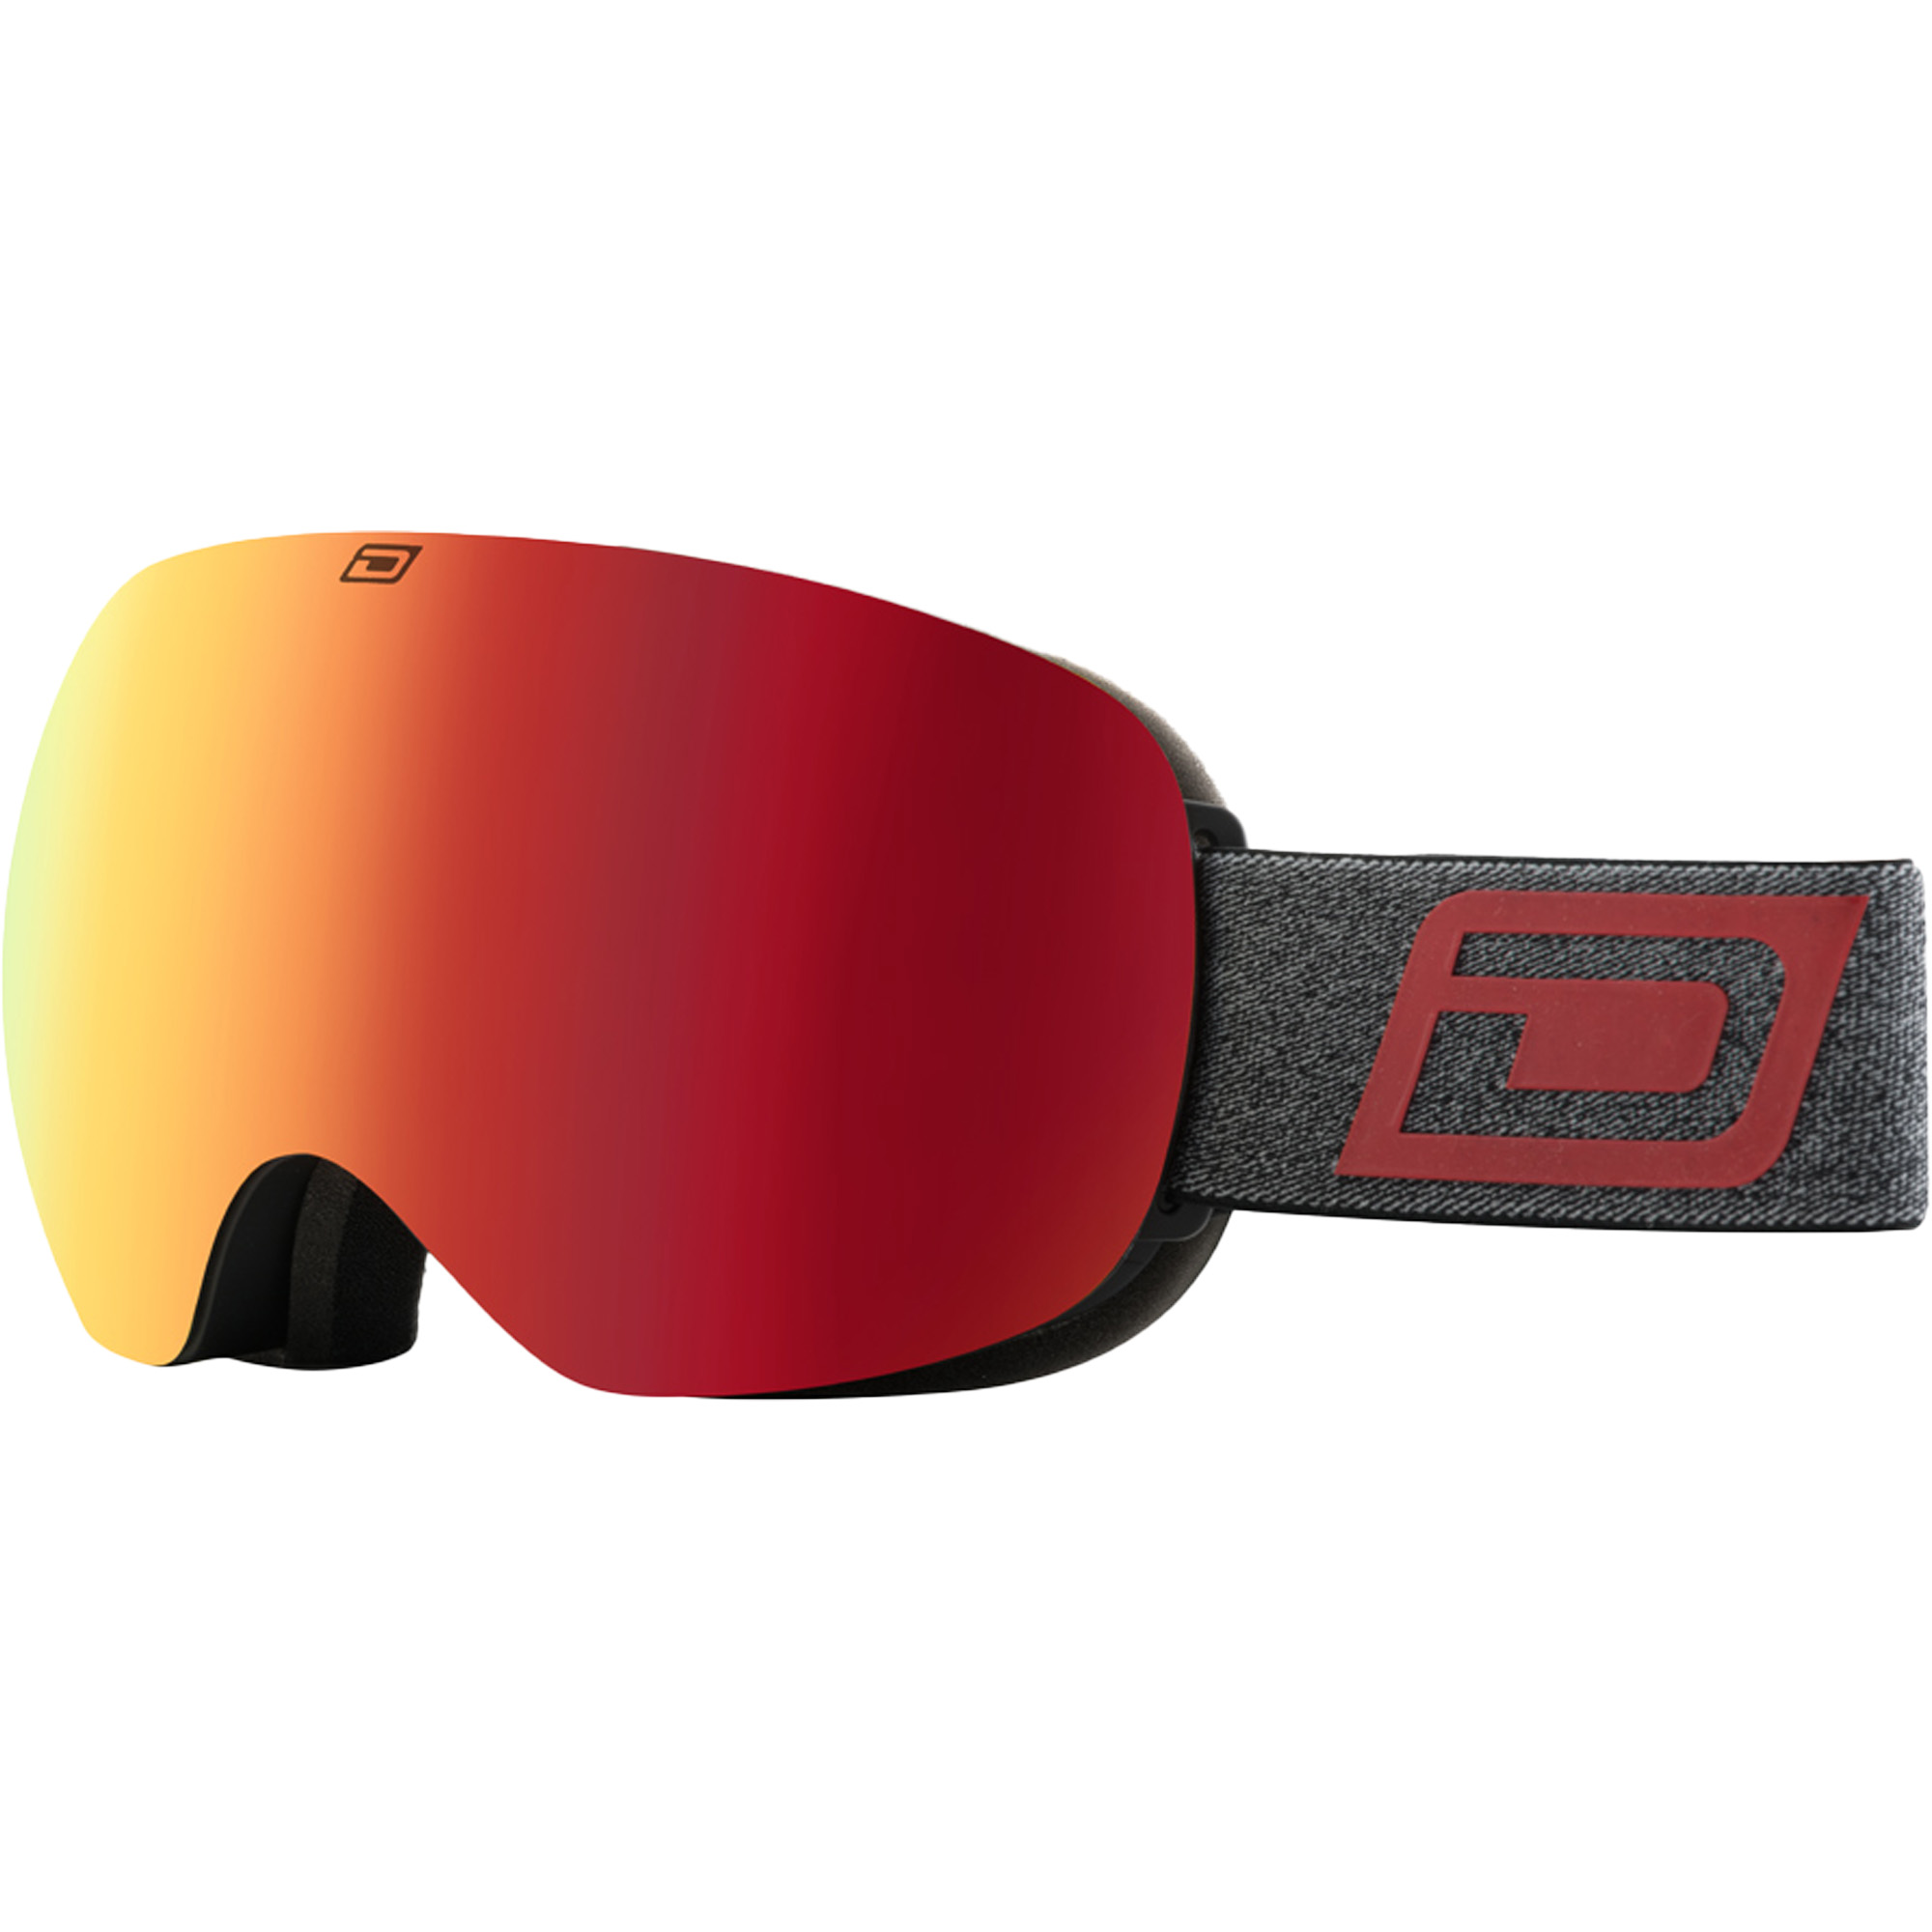 Dirty Dog Omen Snow Goggles